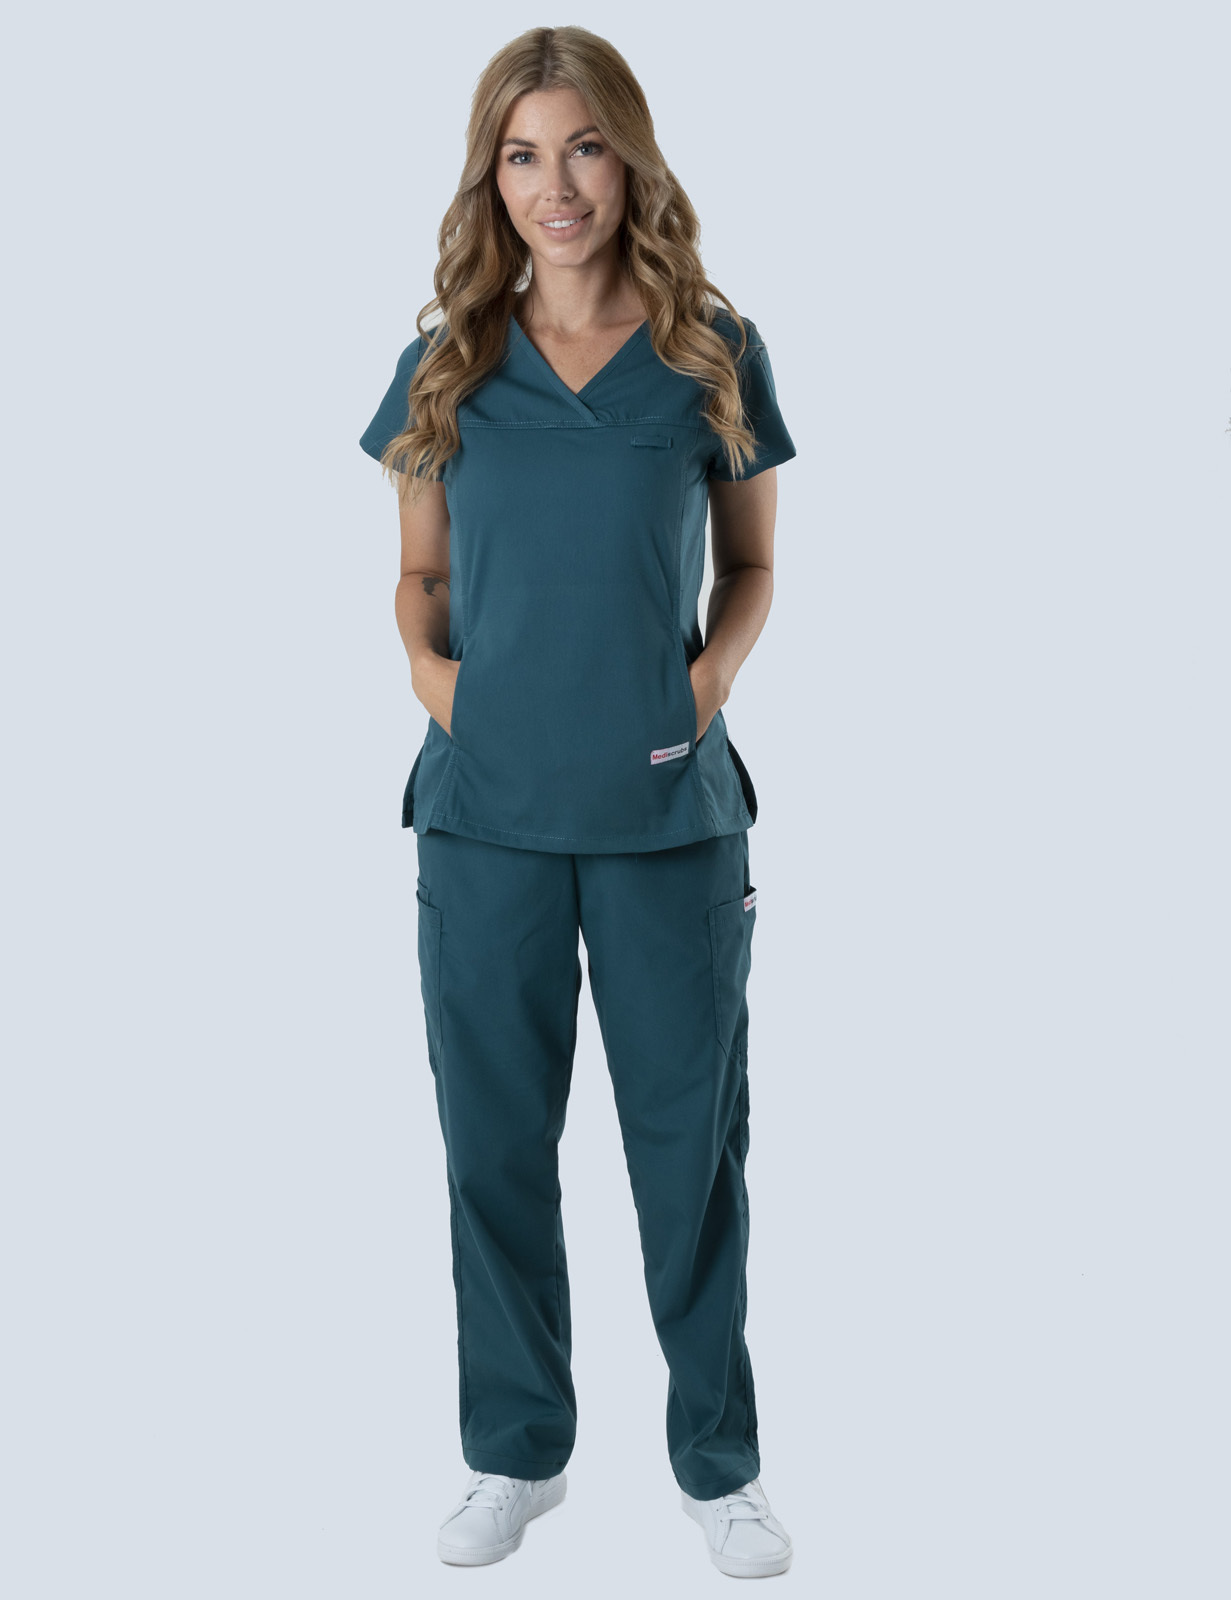 Hopevale Primary Health - CN (Women's Fit Solid Scrub Top and Cargo Pants in Caribbean incl Logos)